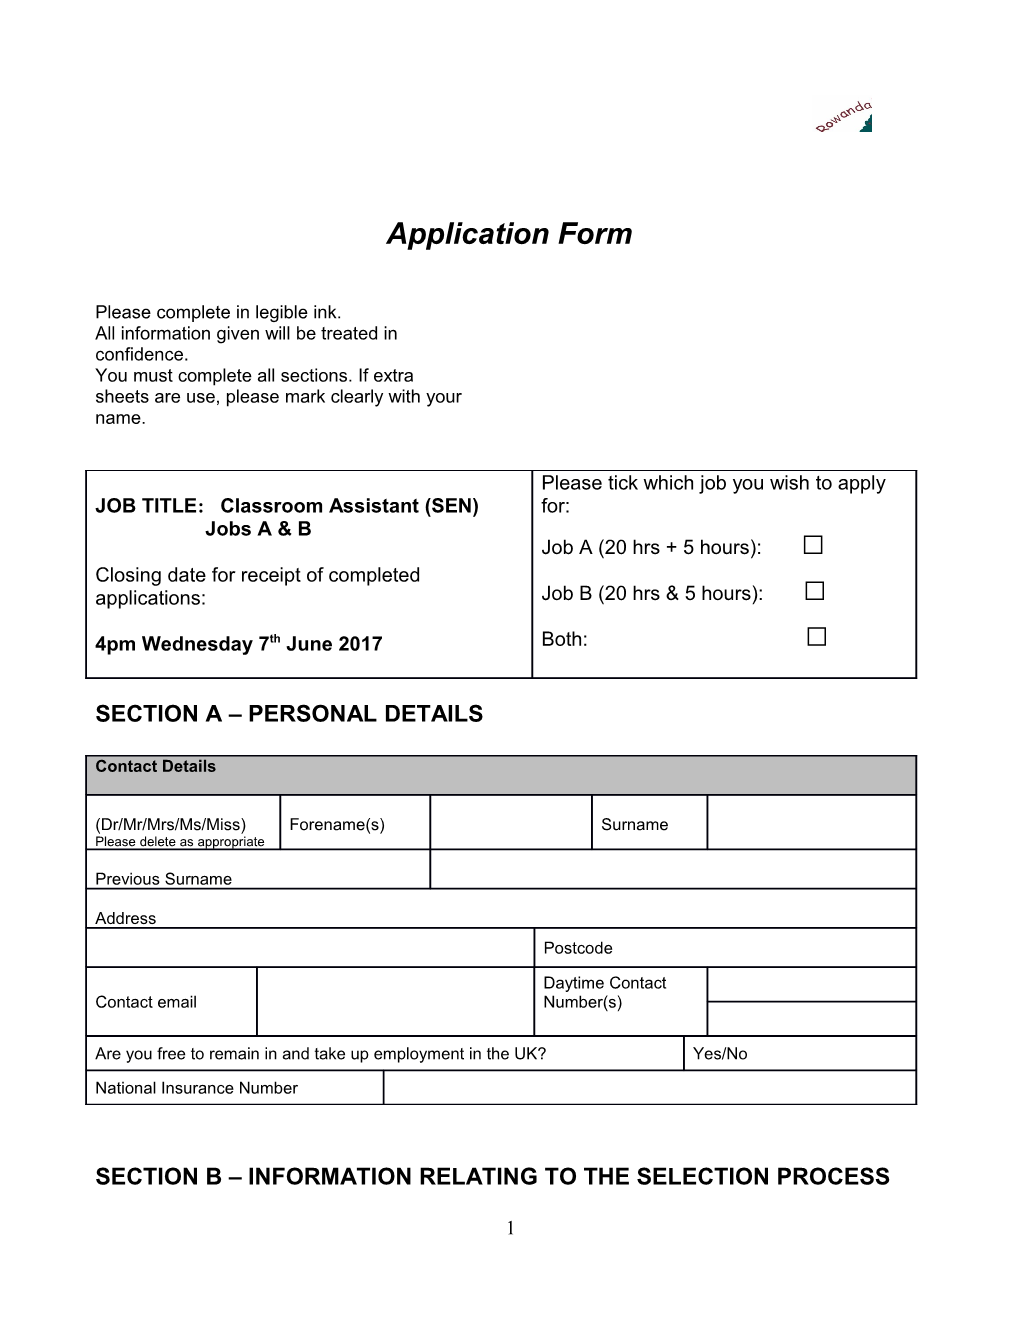 Application Form s72